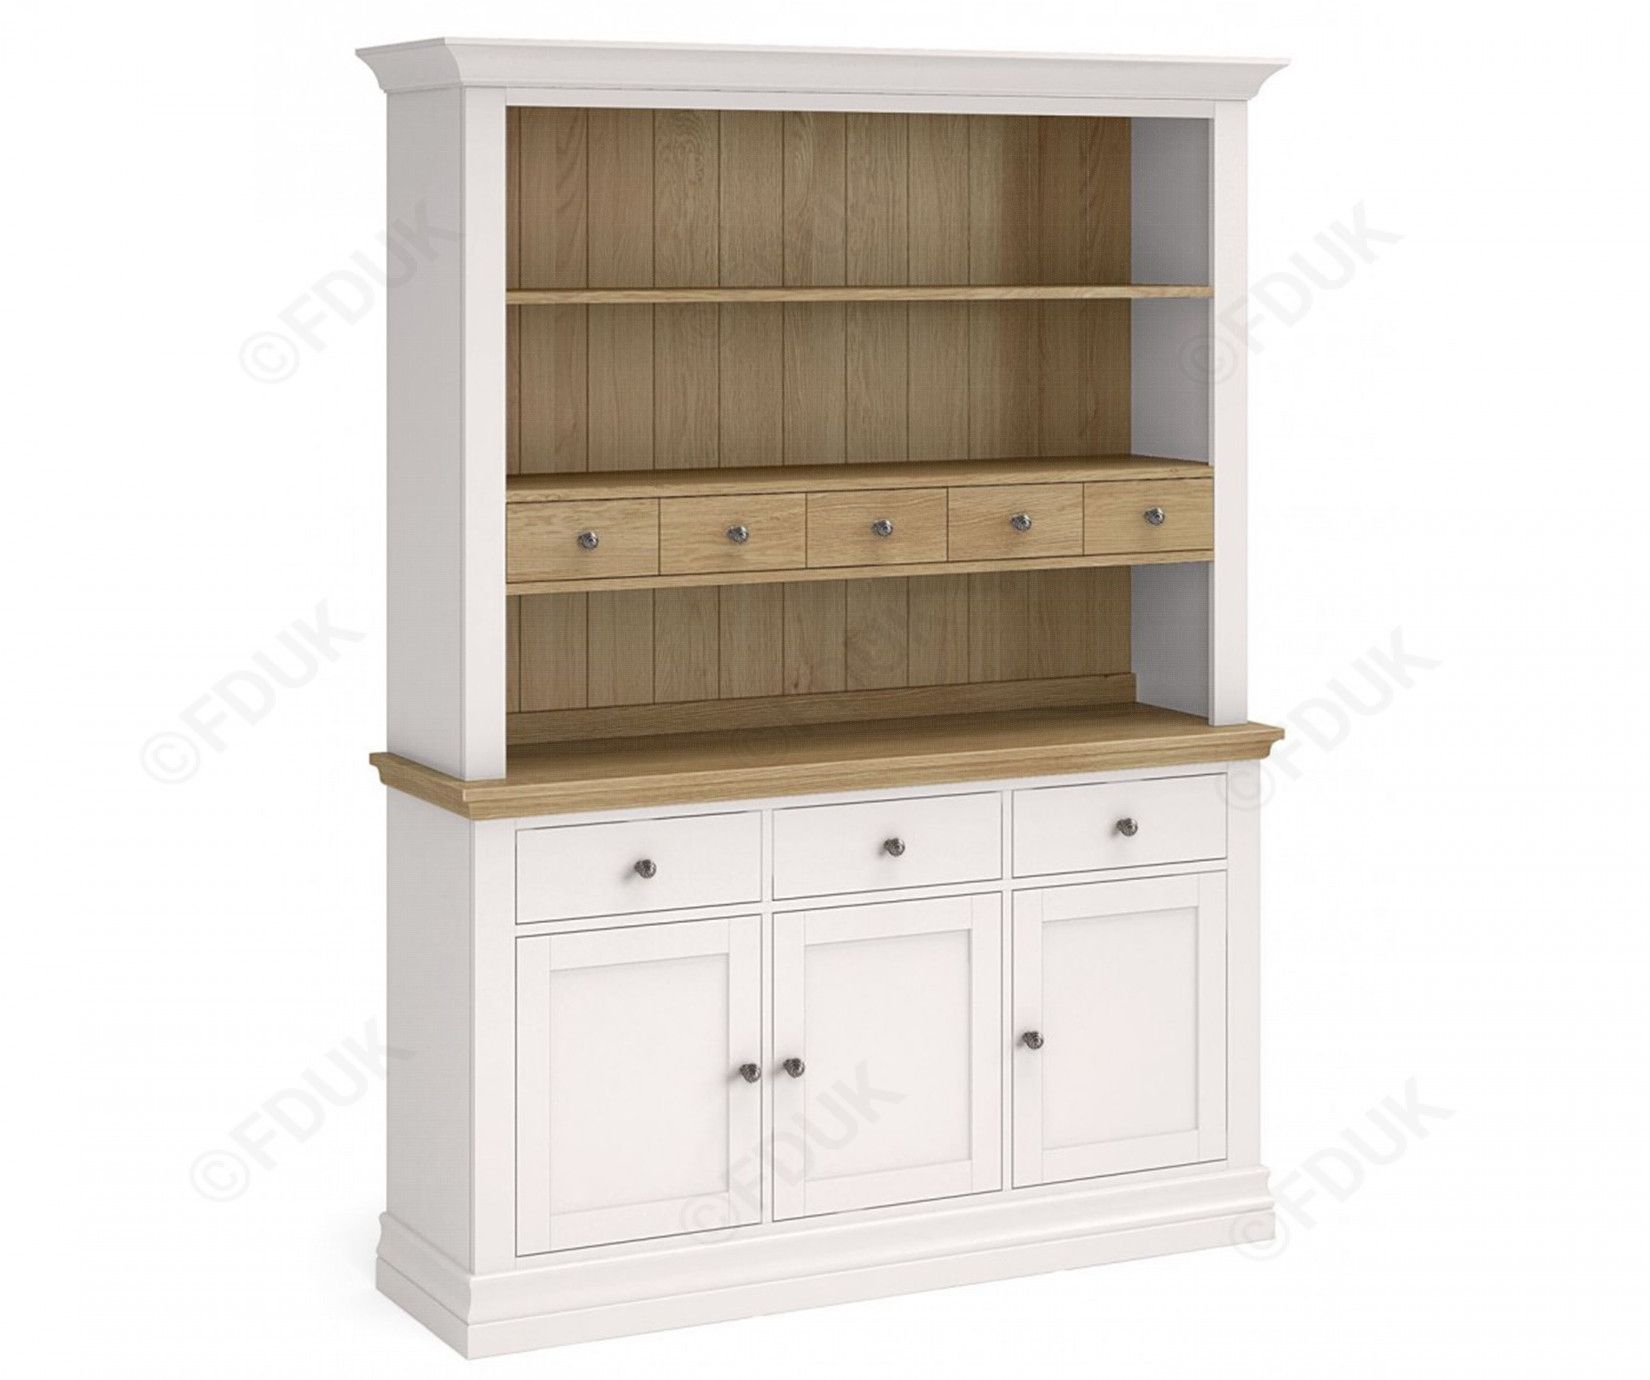 Corndell Annecy Large Sideboard With Open Hutch Fduk Best Price Guarantee  We Will Beat Our Competitors Price! Give Our Sales Team A Call On 0116 235 Inside Annecy Sideboards (View 27 of 30)